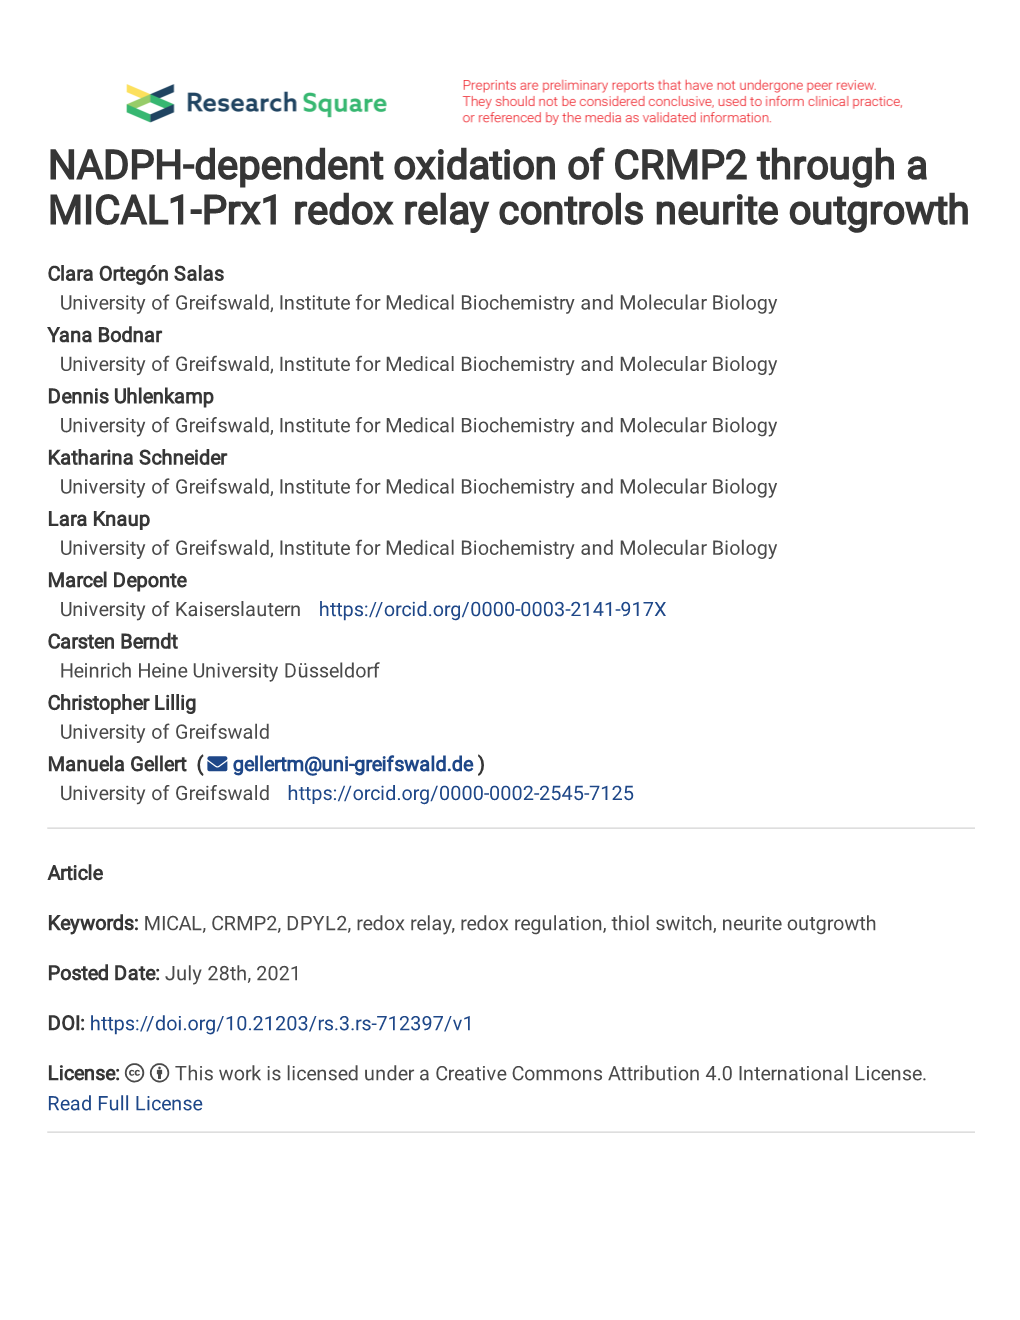 NADPH-Dependent Oxidation of CRMP2 Through a MICAL1-Prx1 Redox Relay Controls Neurite Outgrowth